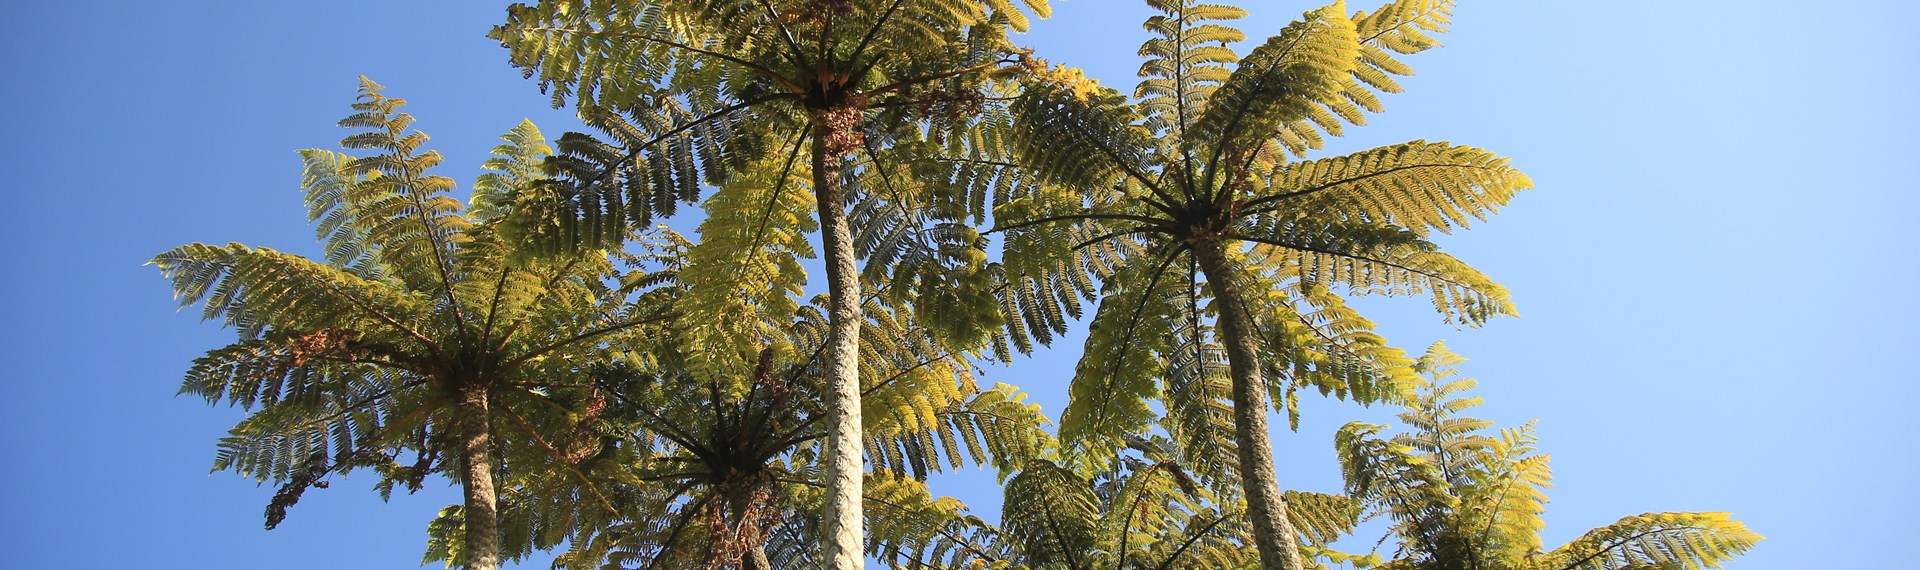 A cluster of native New Zealand tree ferns in the Marlborough Sounds, New Zealand.